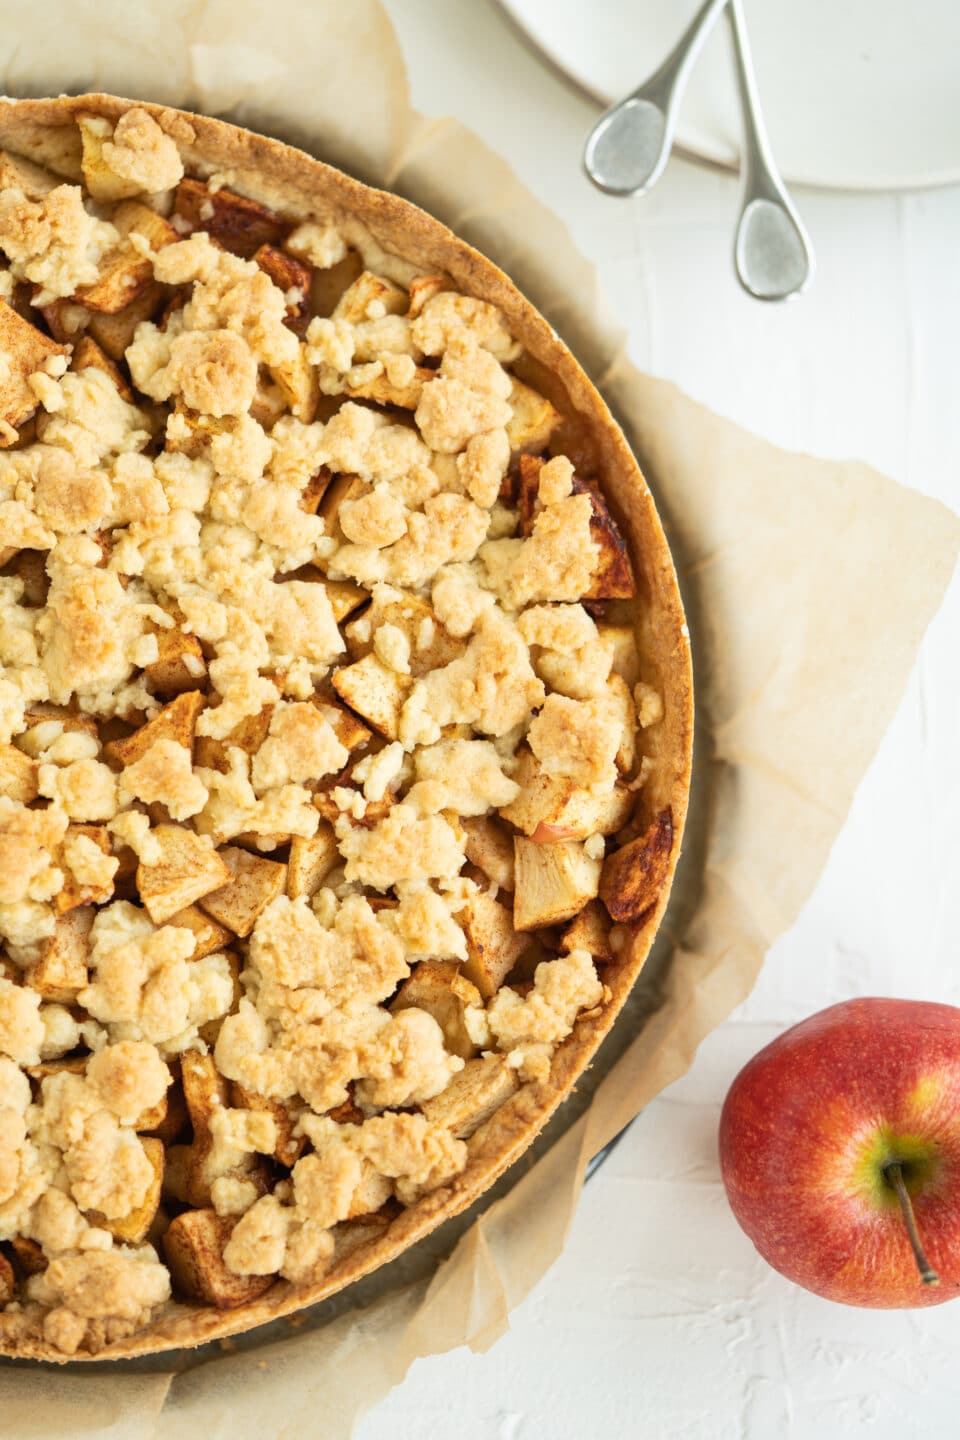 Apple Cake with Crumbles